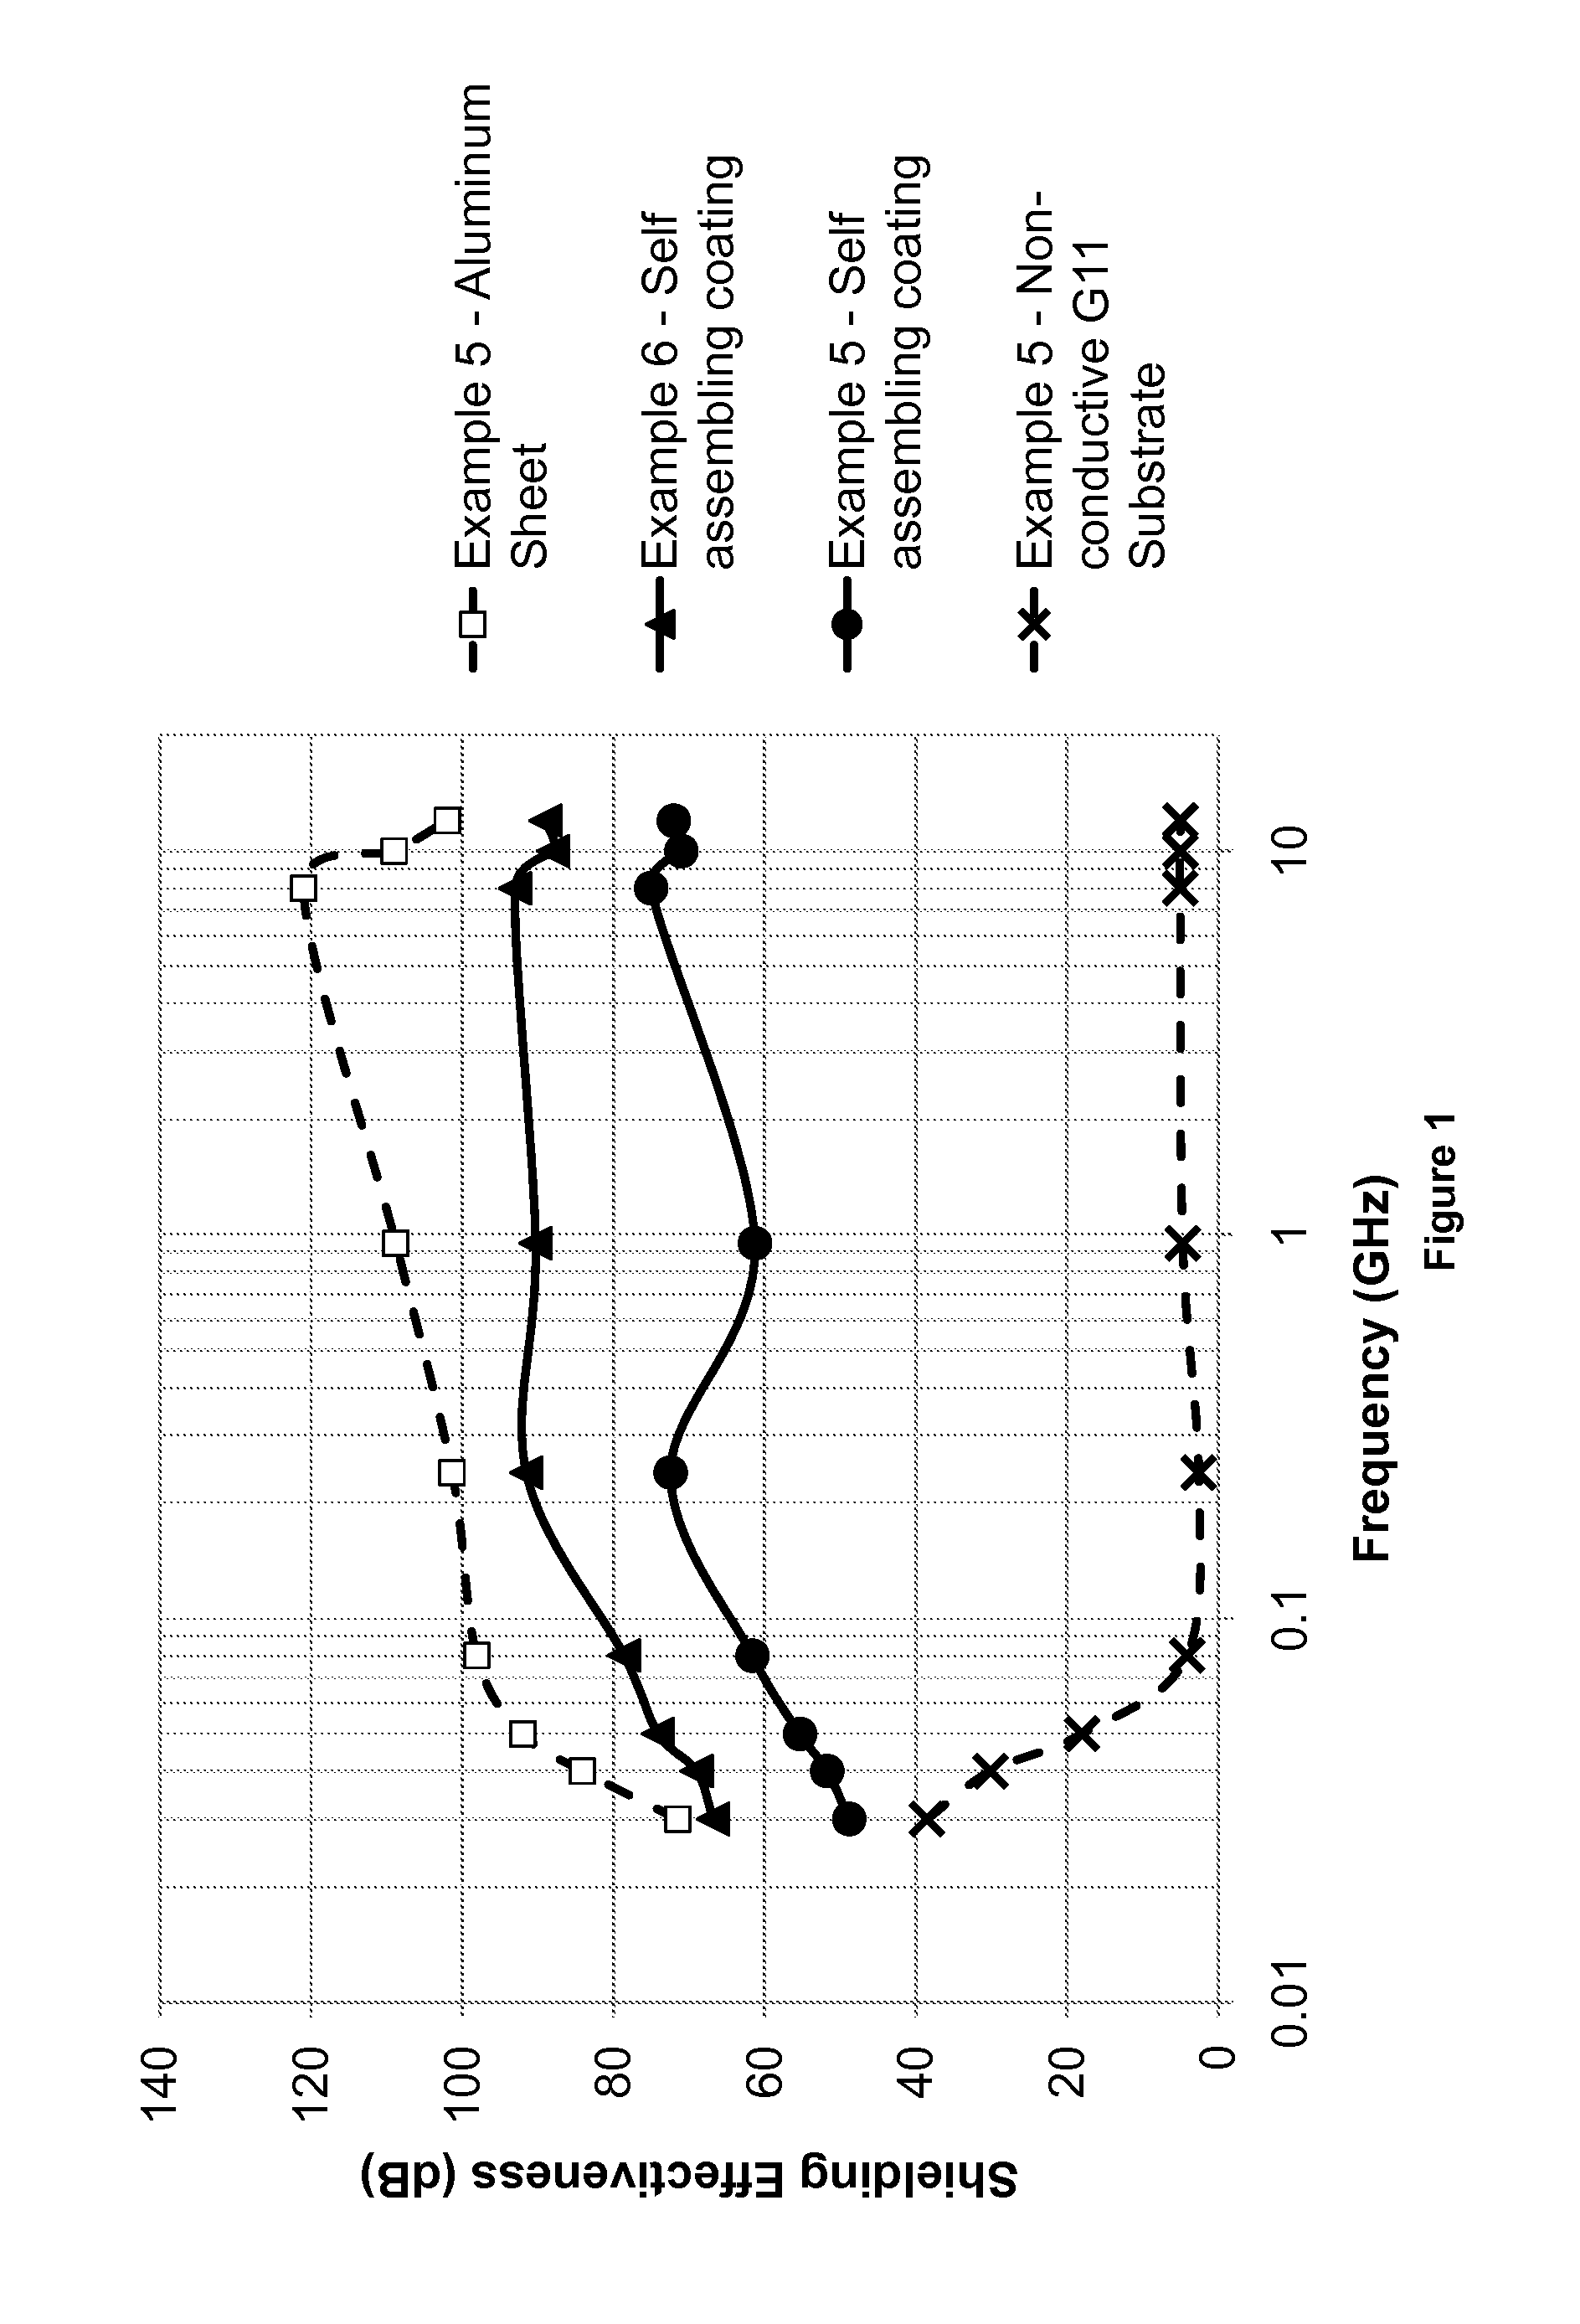 Method for shielding a substrate from electromagnetic interference